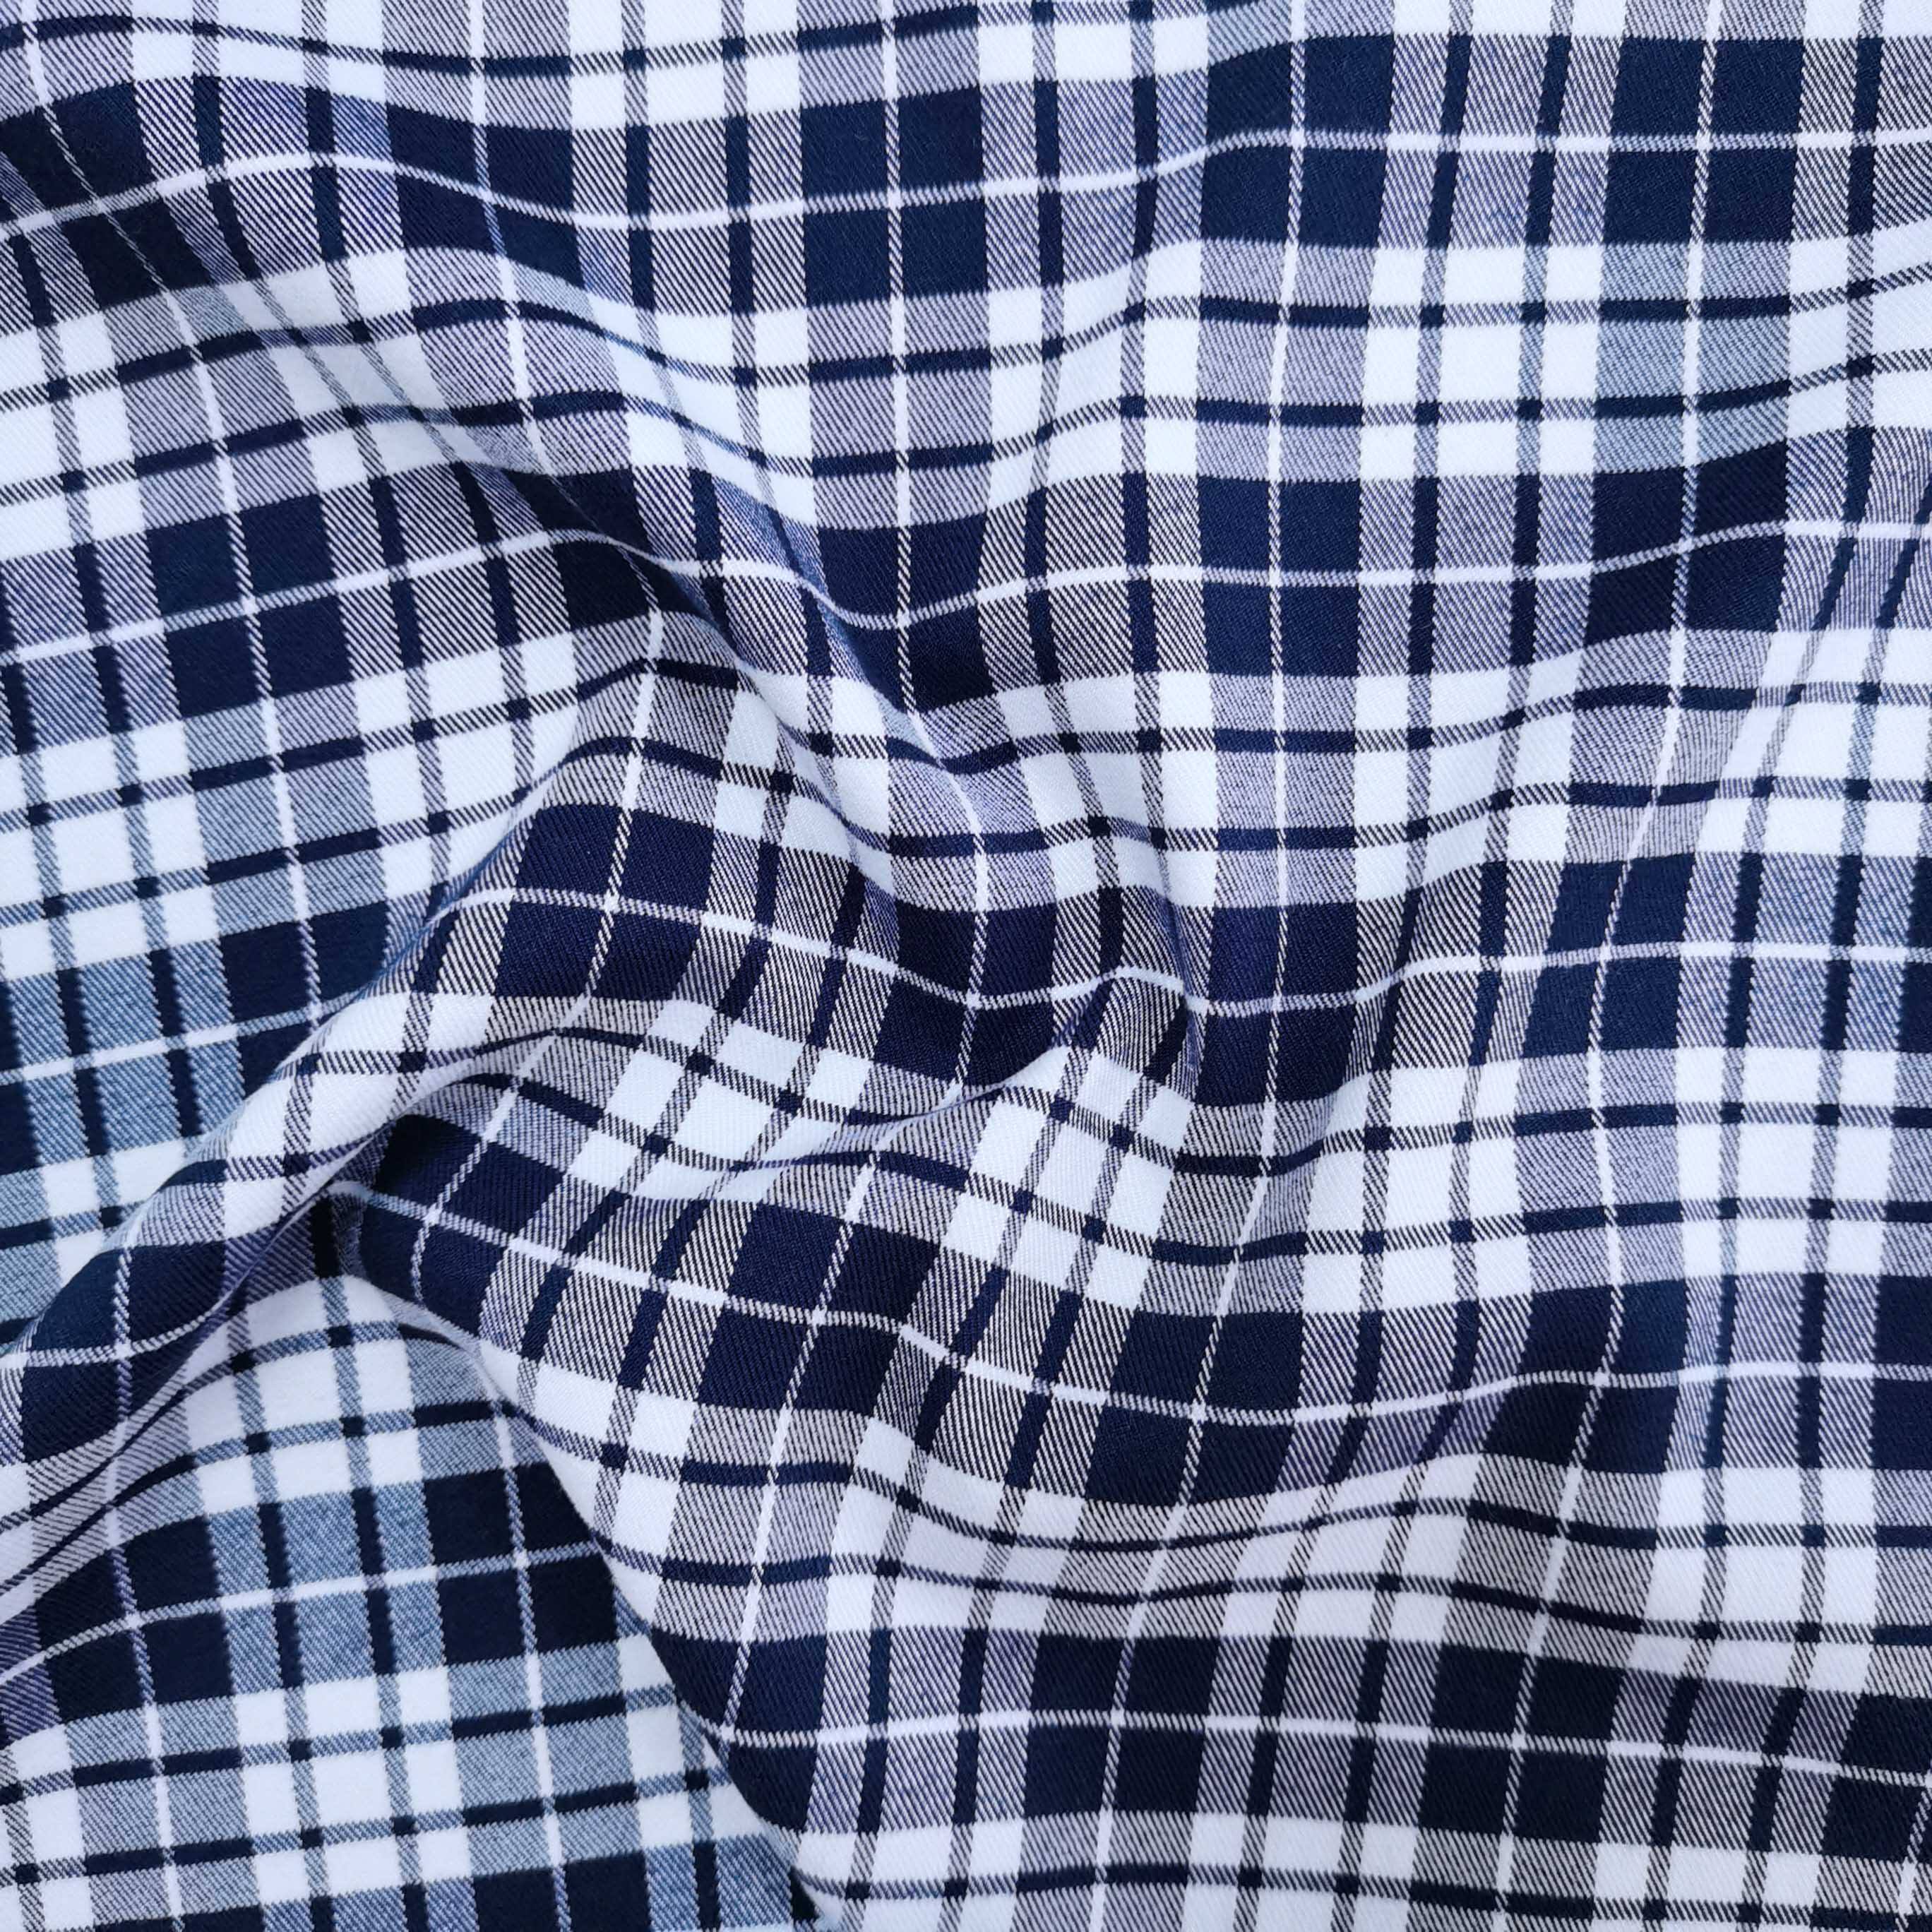 Hot selling 97% polyester 3% spandex stock yarn dyed check fabric